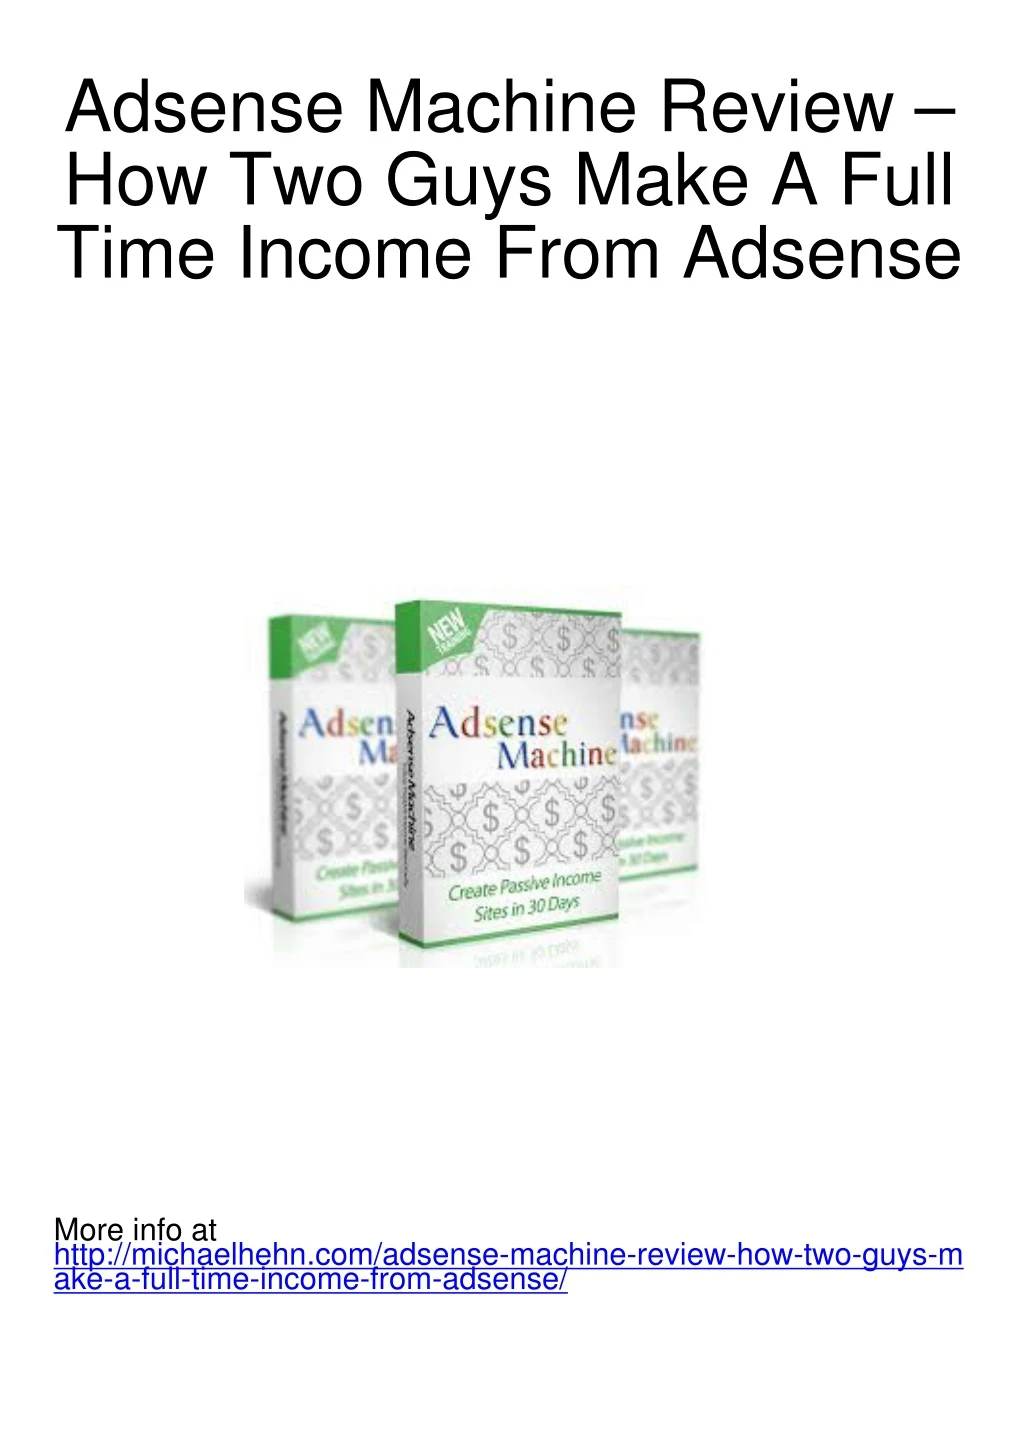 adsense machine review how two guys make a full